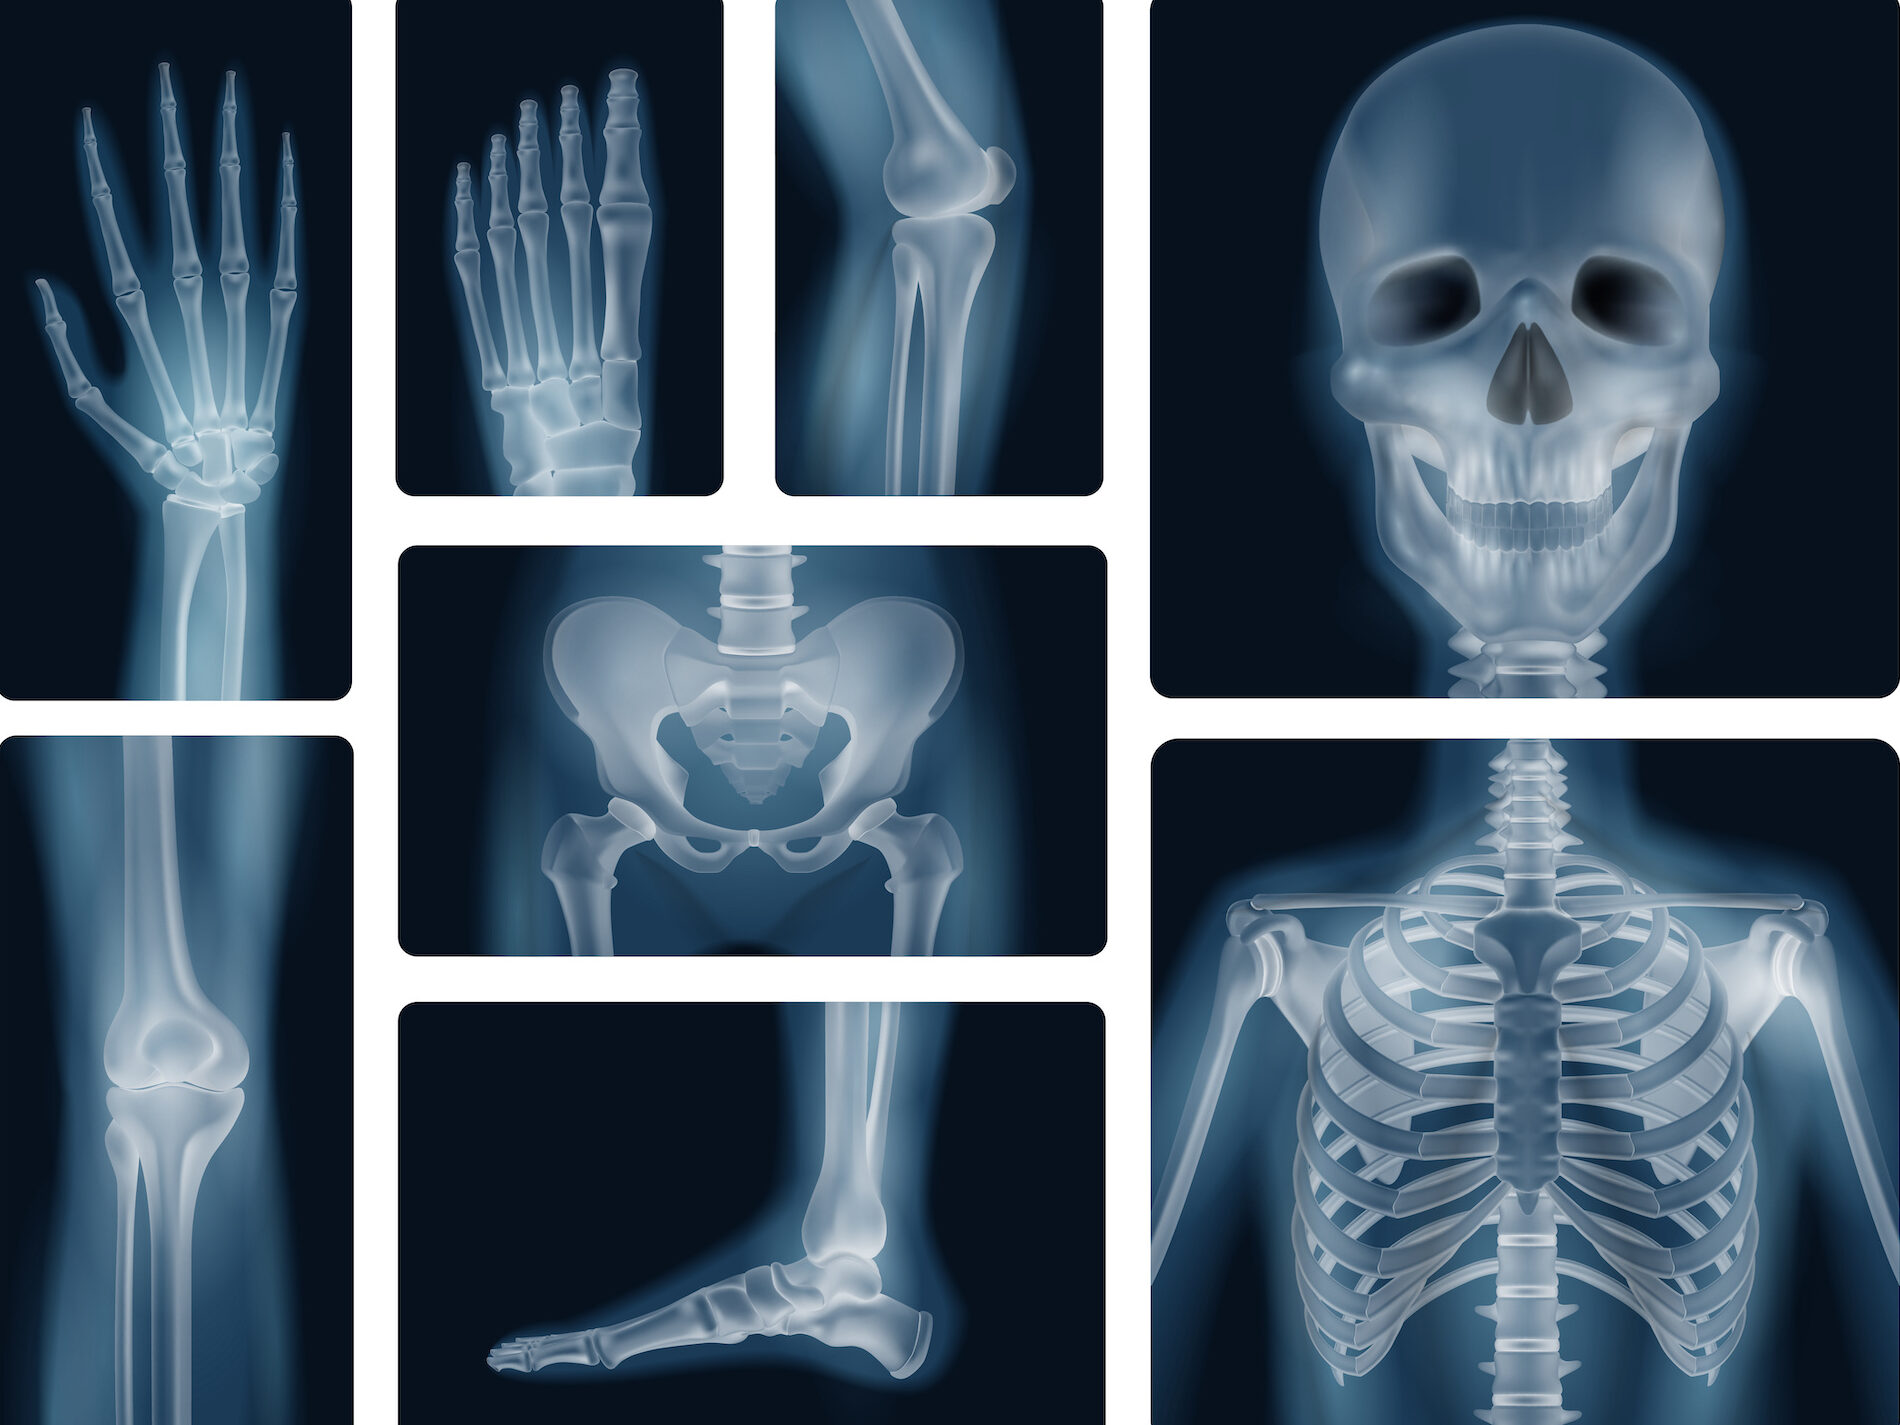 X-Rays Could Provide Crucial Clues In Identifying Domestic Violence